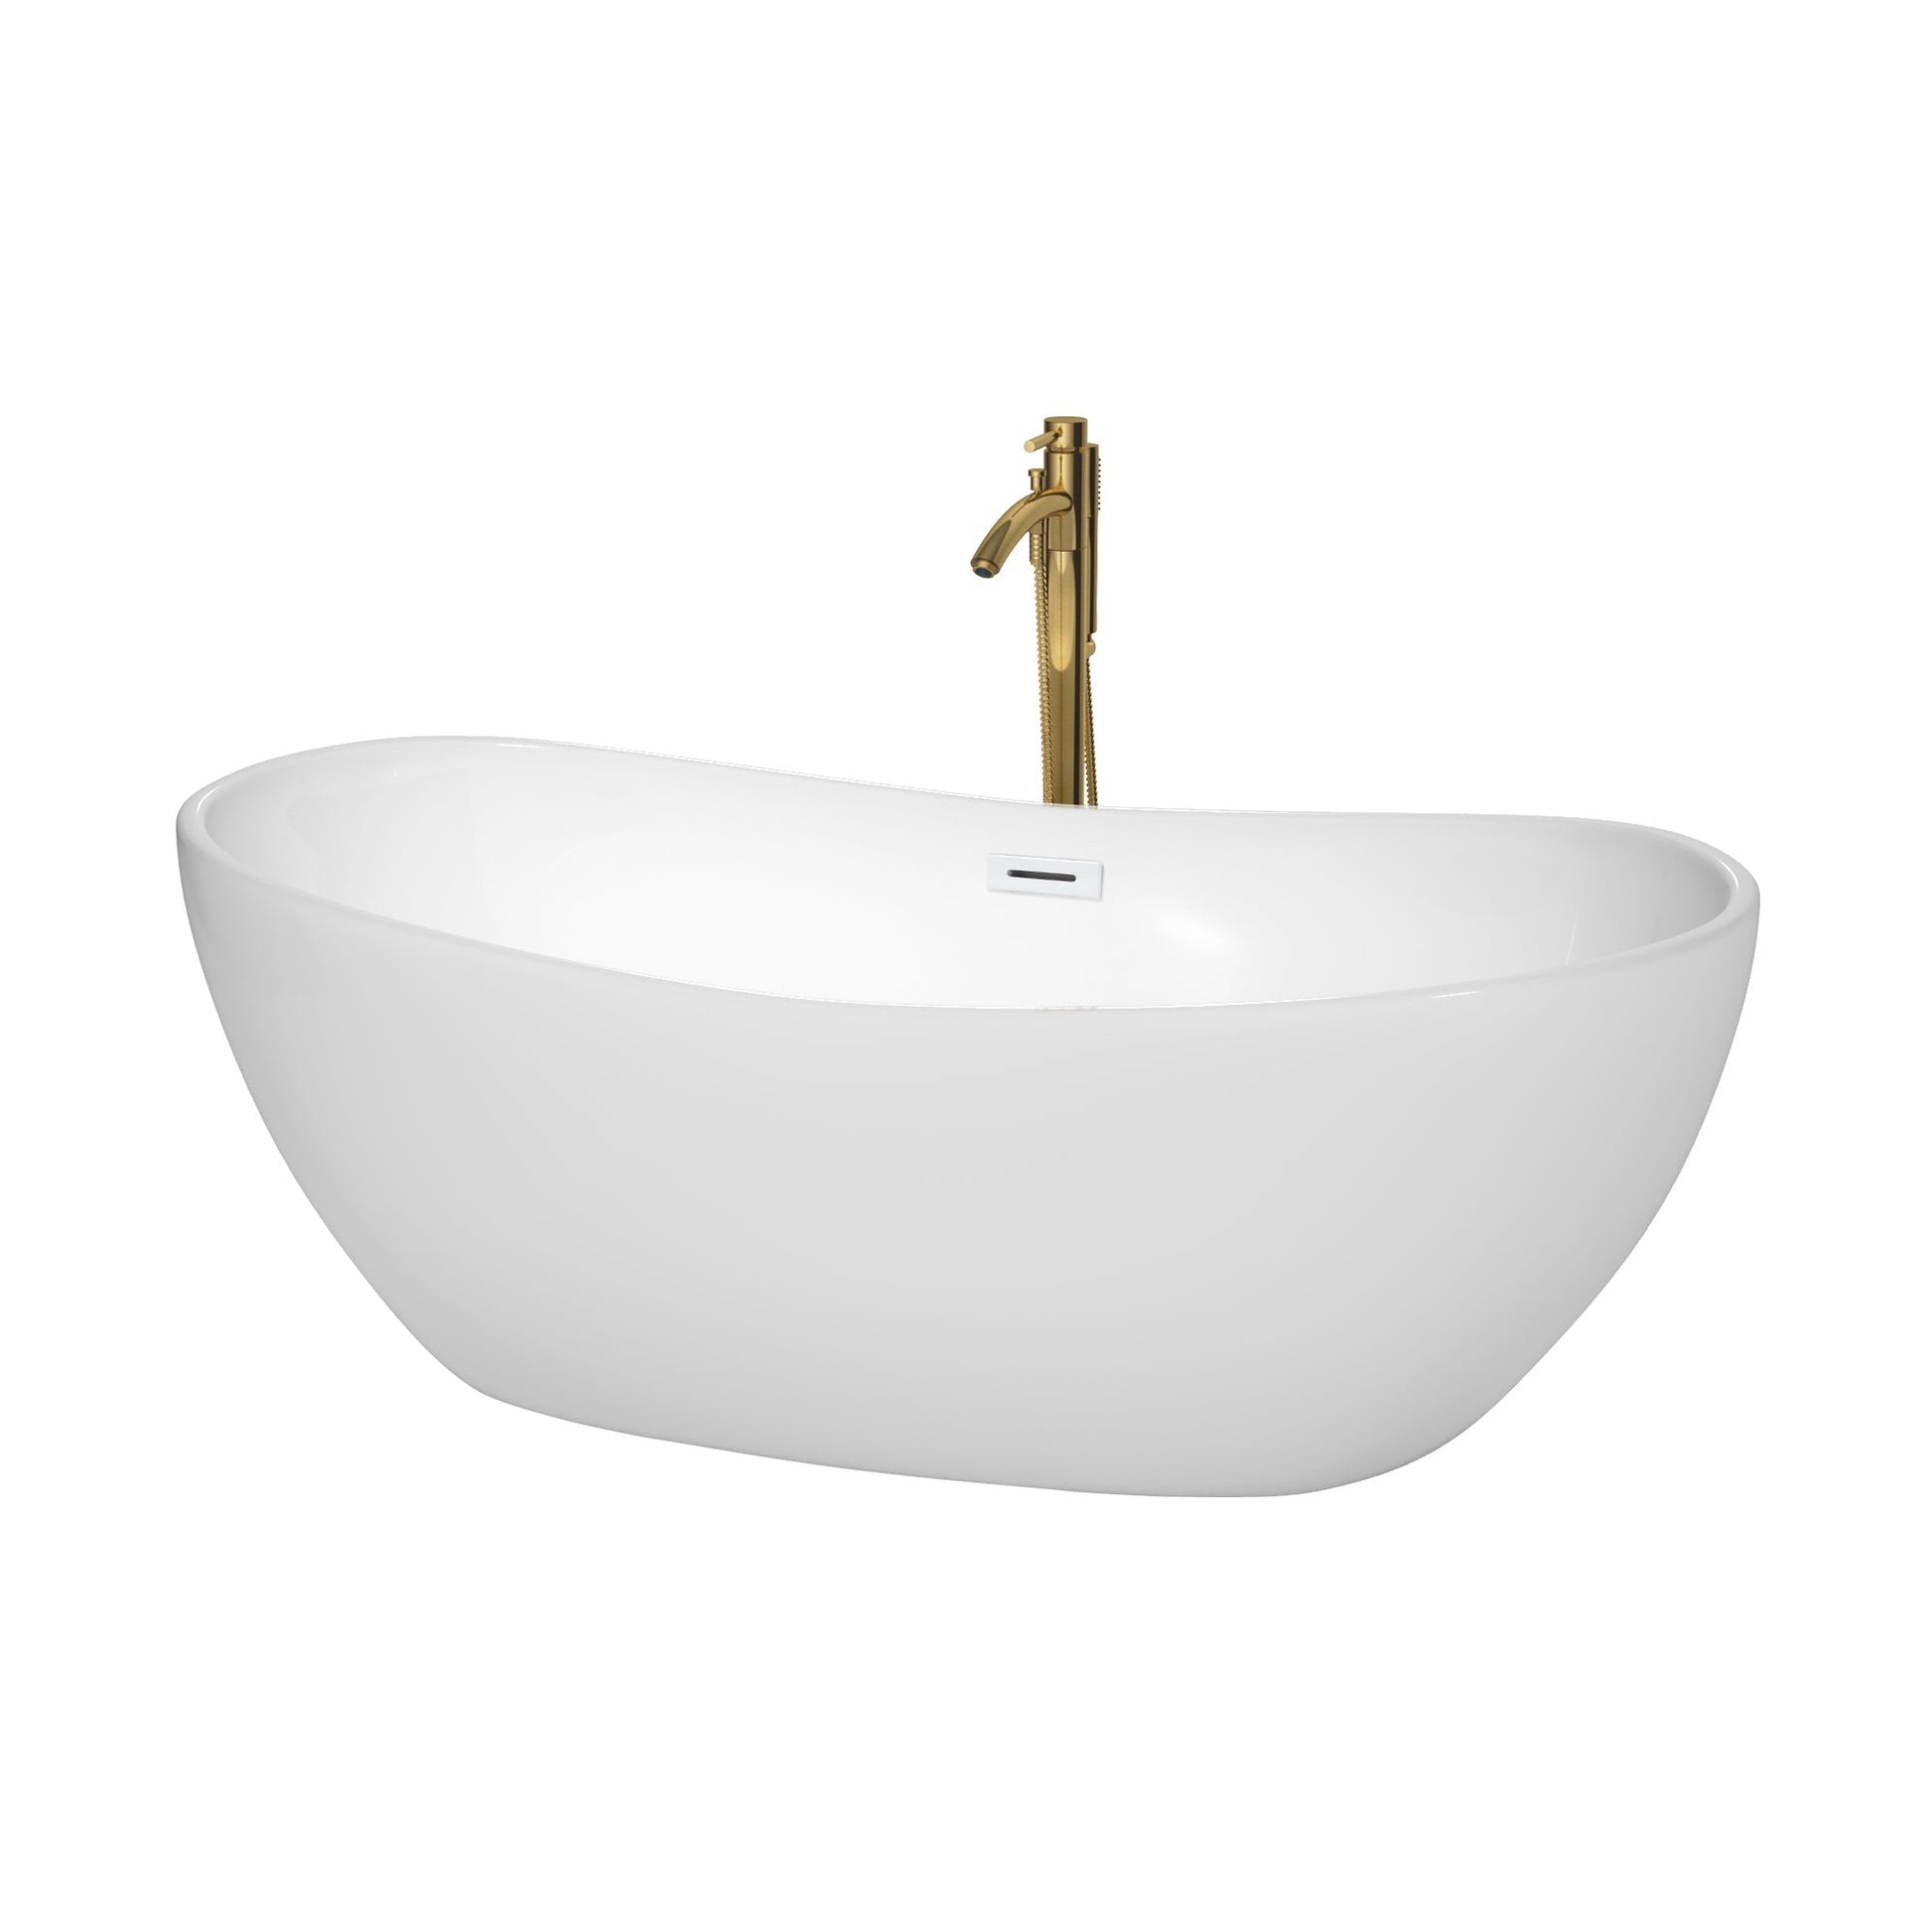 Wyndham Collection Rebecca 65" Freestanding Bathtub in White With Shiny White Trim and Floor Mounted Faucet in Brushed Gold